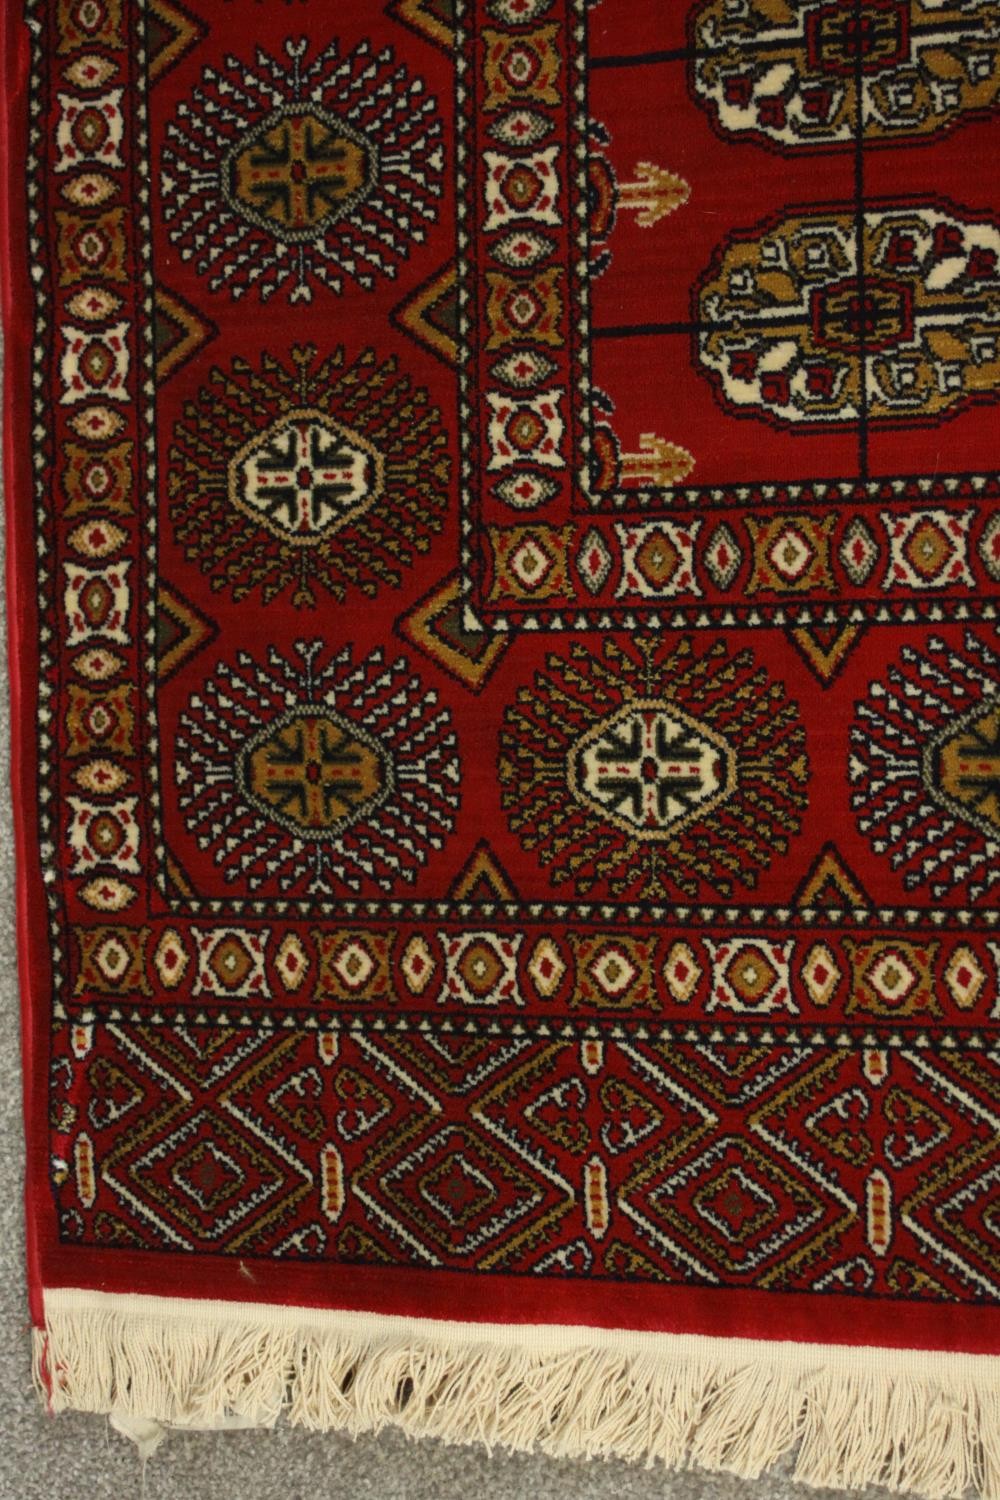 A Bokhara carpet with elephant's foot motifs on a burgundy ground within floral multiple borders. - Image 6 of 8